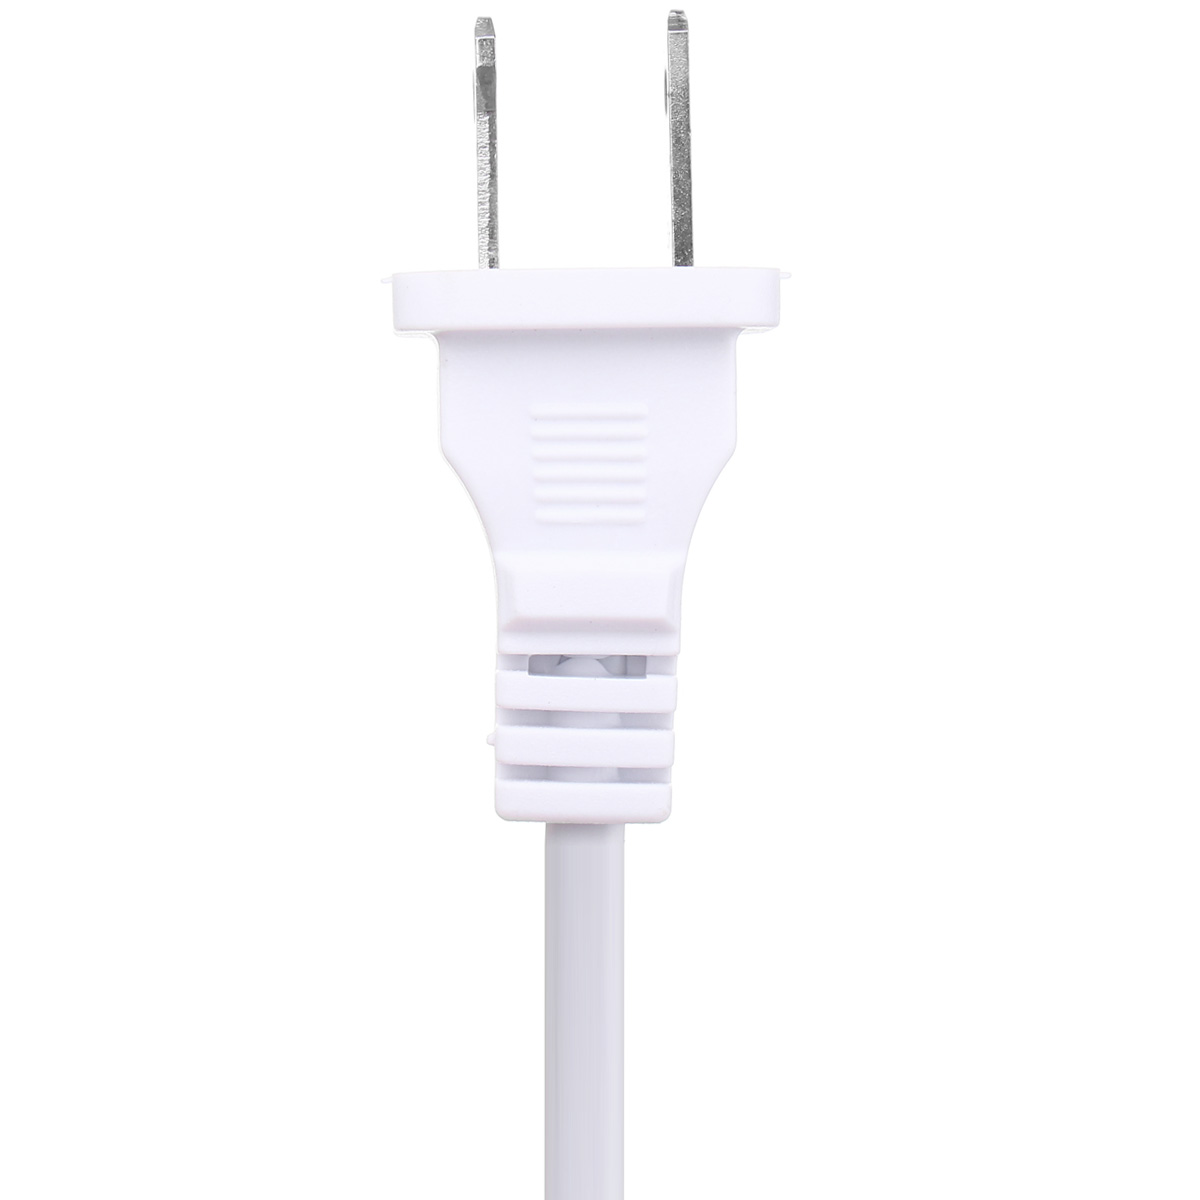 1M-E12-Socket-Bulb-Adapter-US-Plug-with-Dimmer-Cable-Cord-Switch-for-Himalayan-Salt-Lamp-Electric-1301444-6